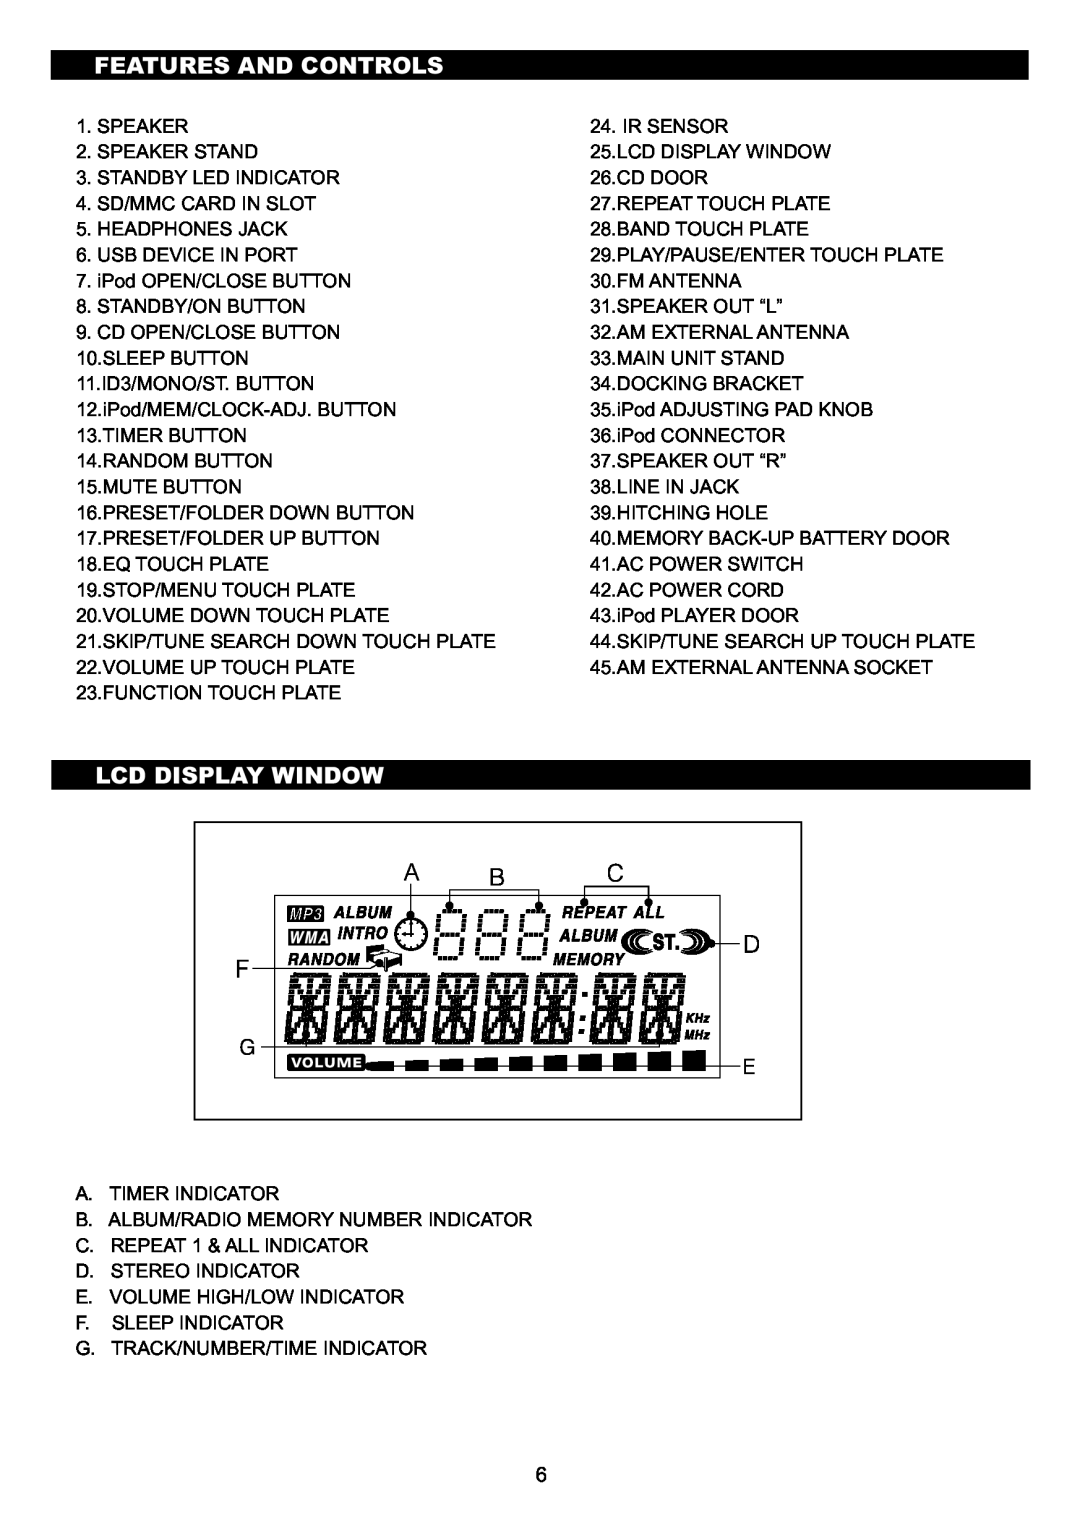 Sanyo DC-MX41i instruction manual Lcd Display Window, Features And Controls 